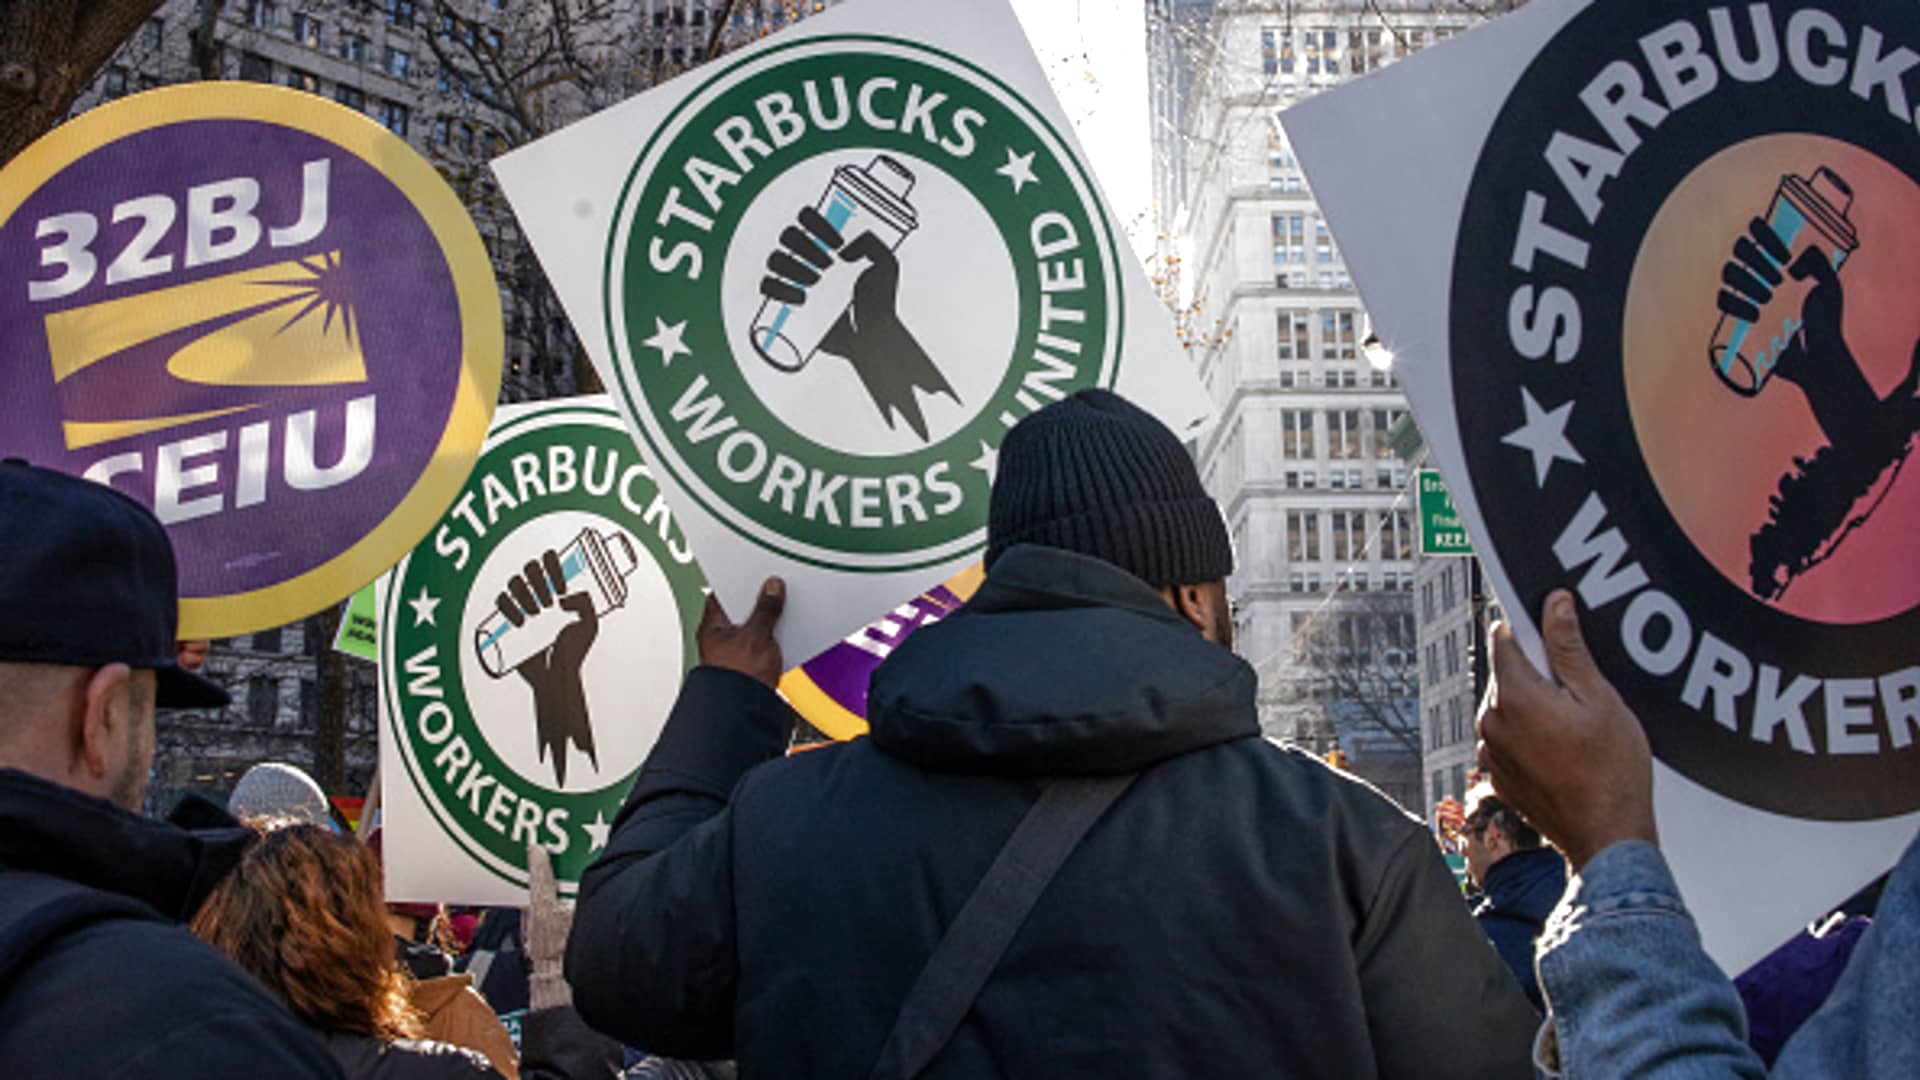 Starbucks shareholders to vote on proposals for labor probe, succession planning